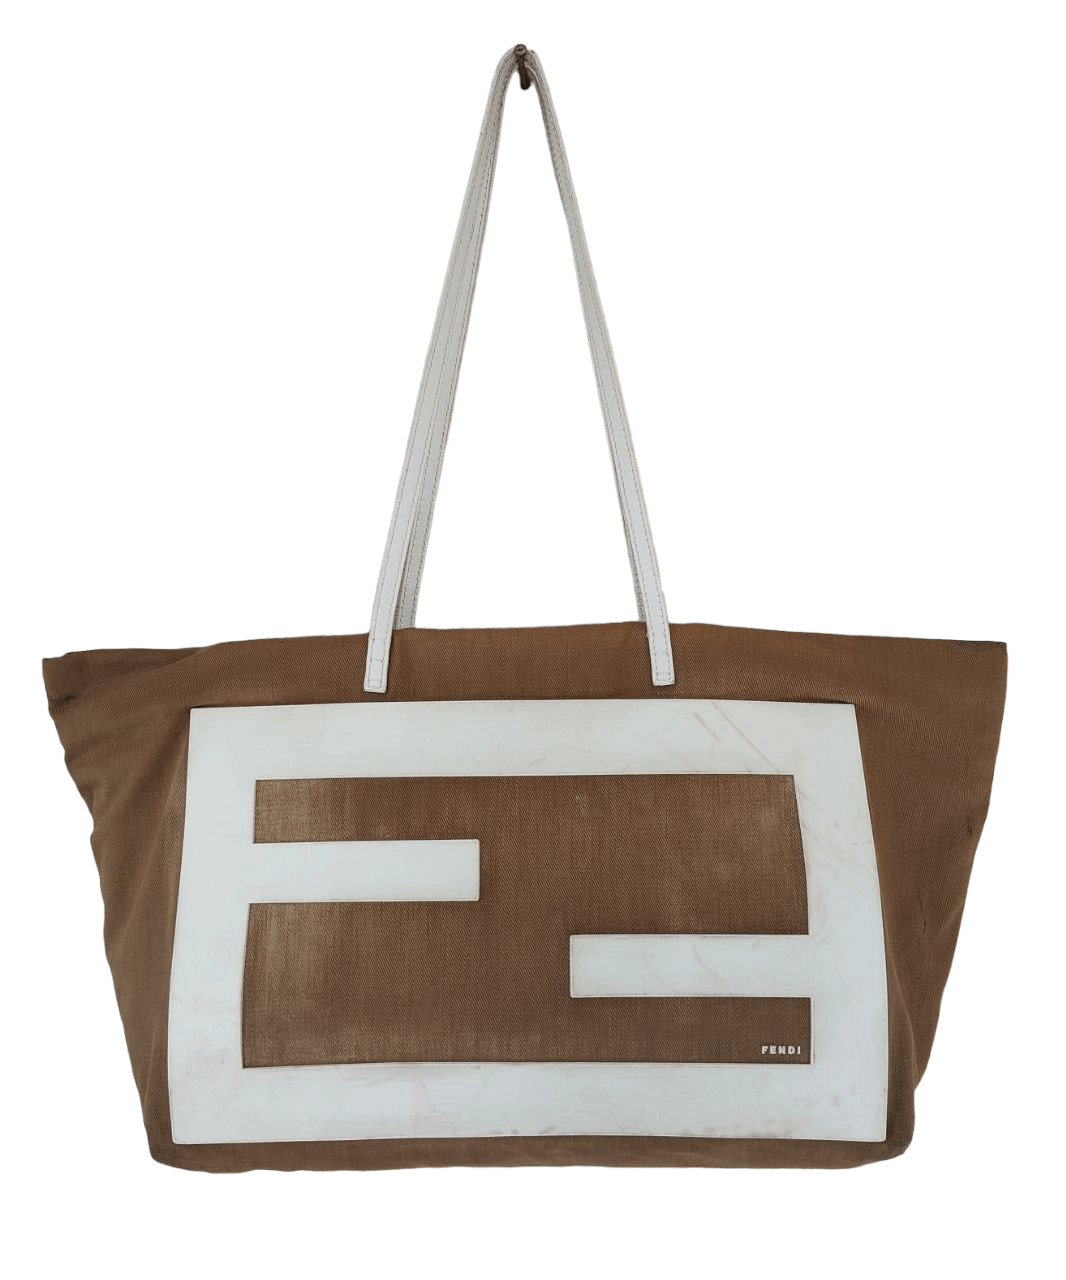 Fendi Dark Red Monogram Zucca Roll Tote Bag with Pouch 2FF719